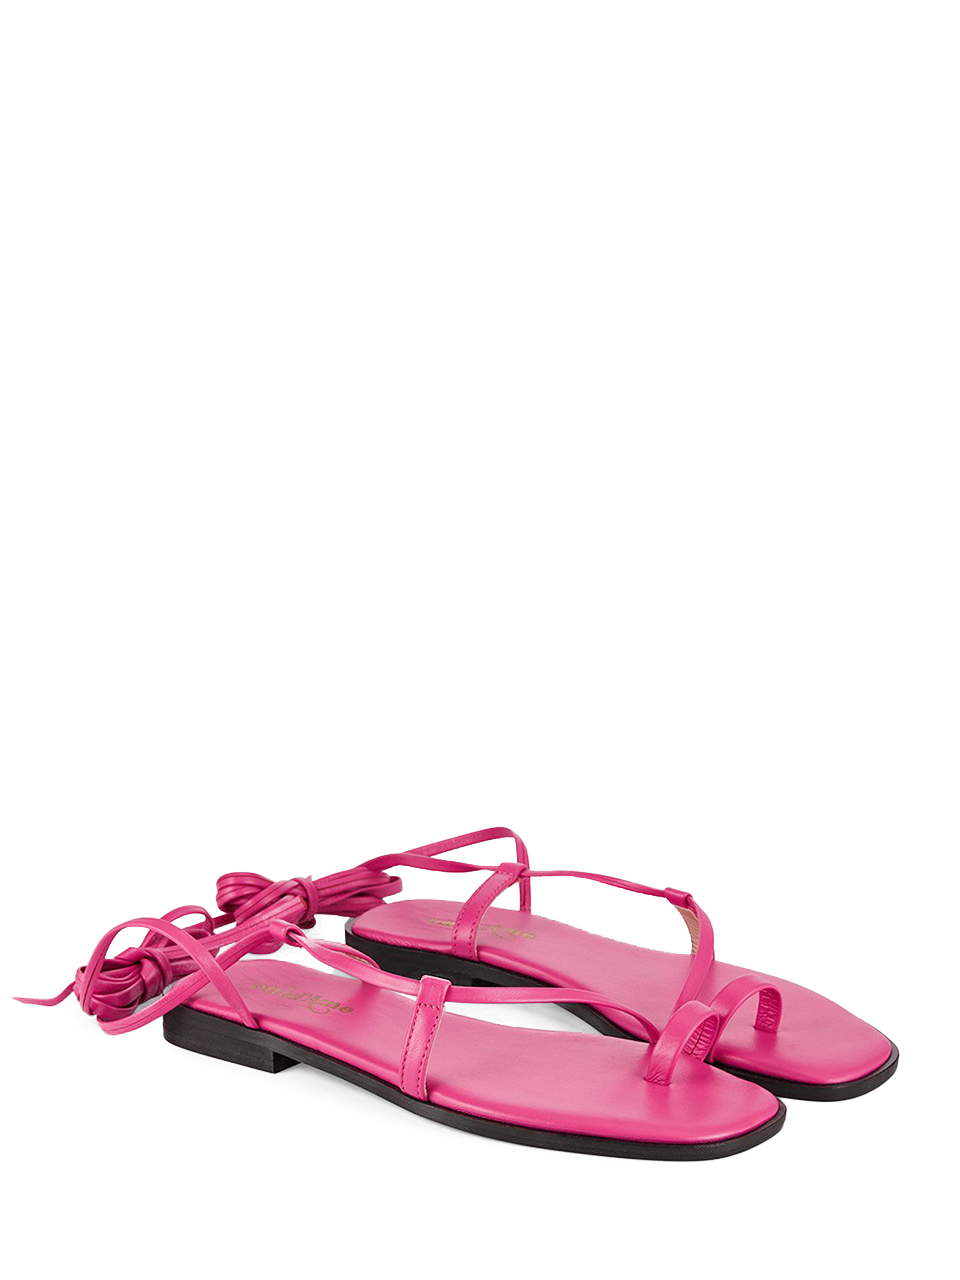 Ottod'Ame Leather Strappy Sandal in Pink Front Side View 